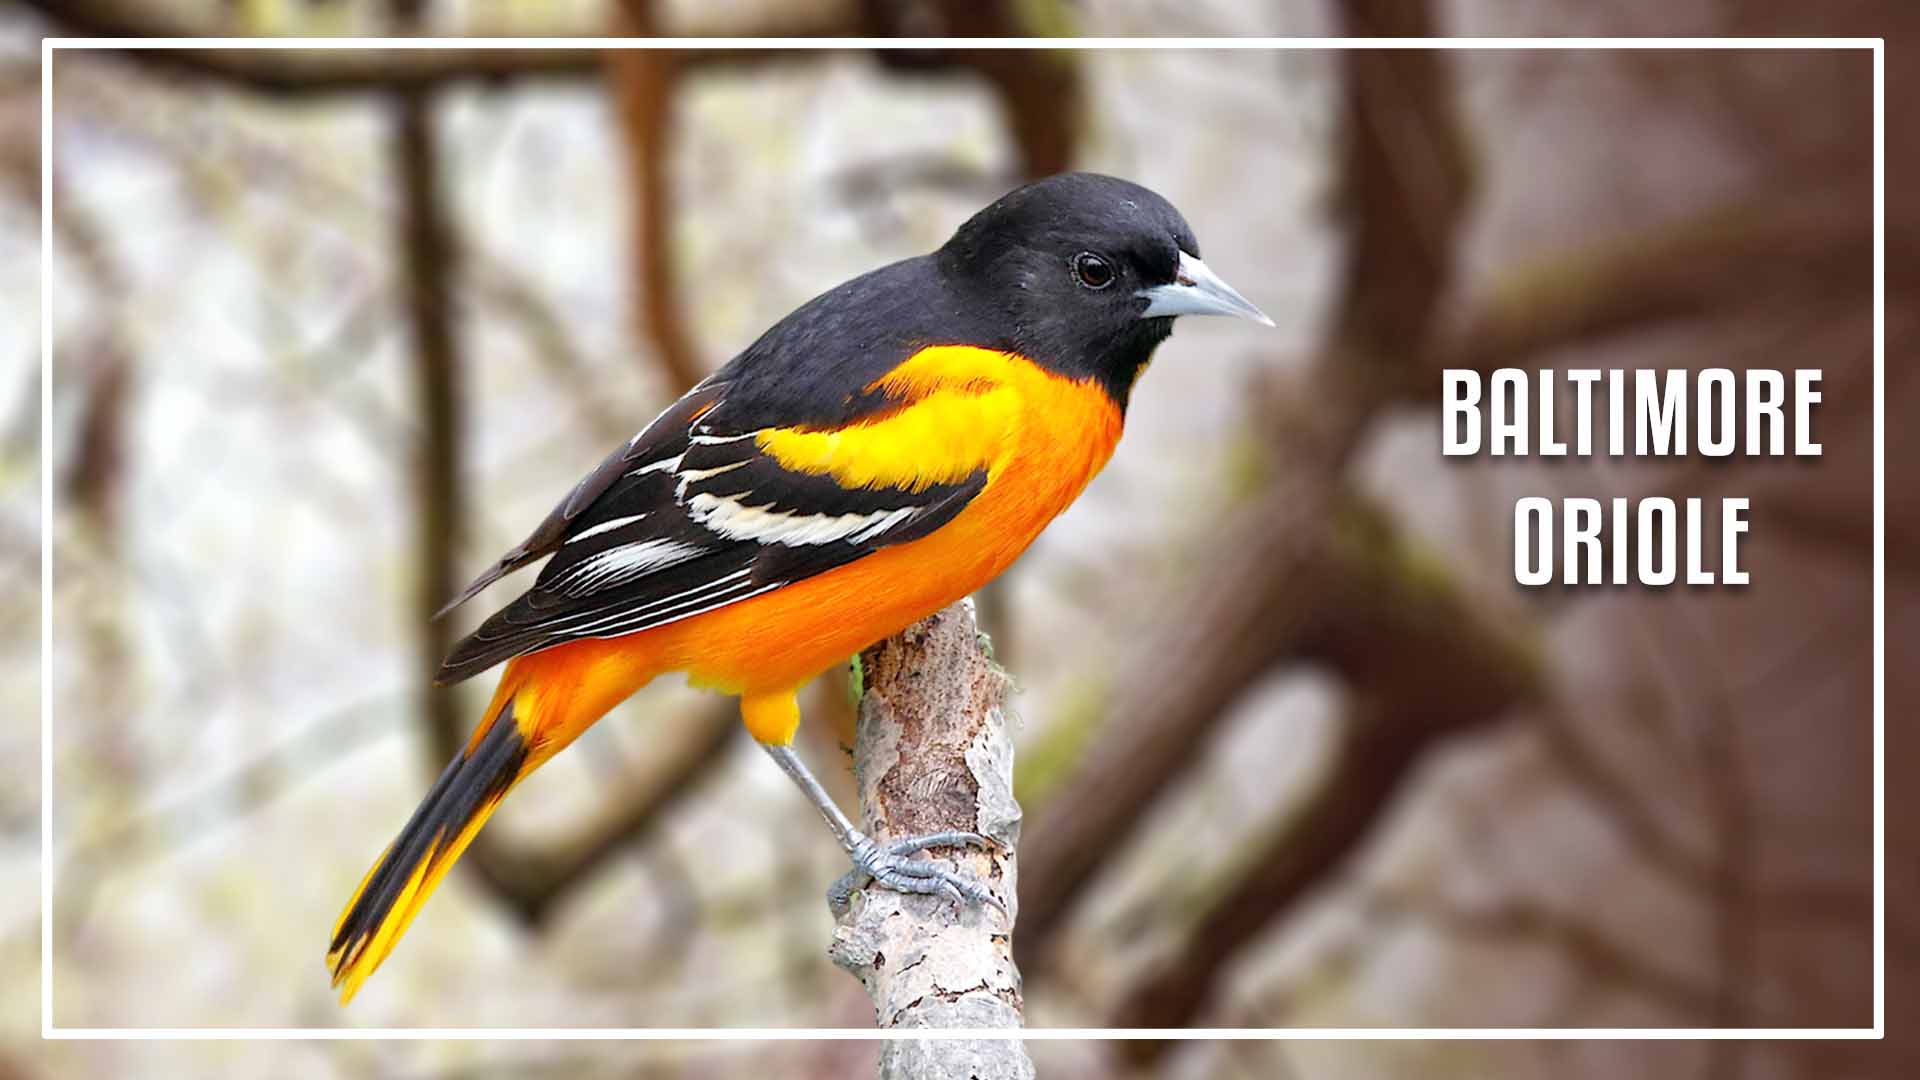 Baltimore oriole is a black bird with orange stripe on wings